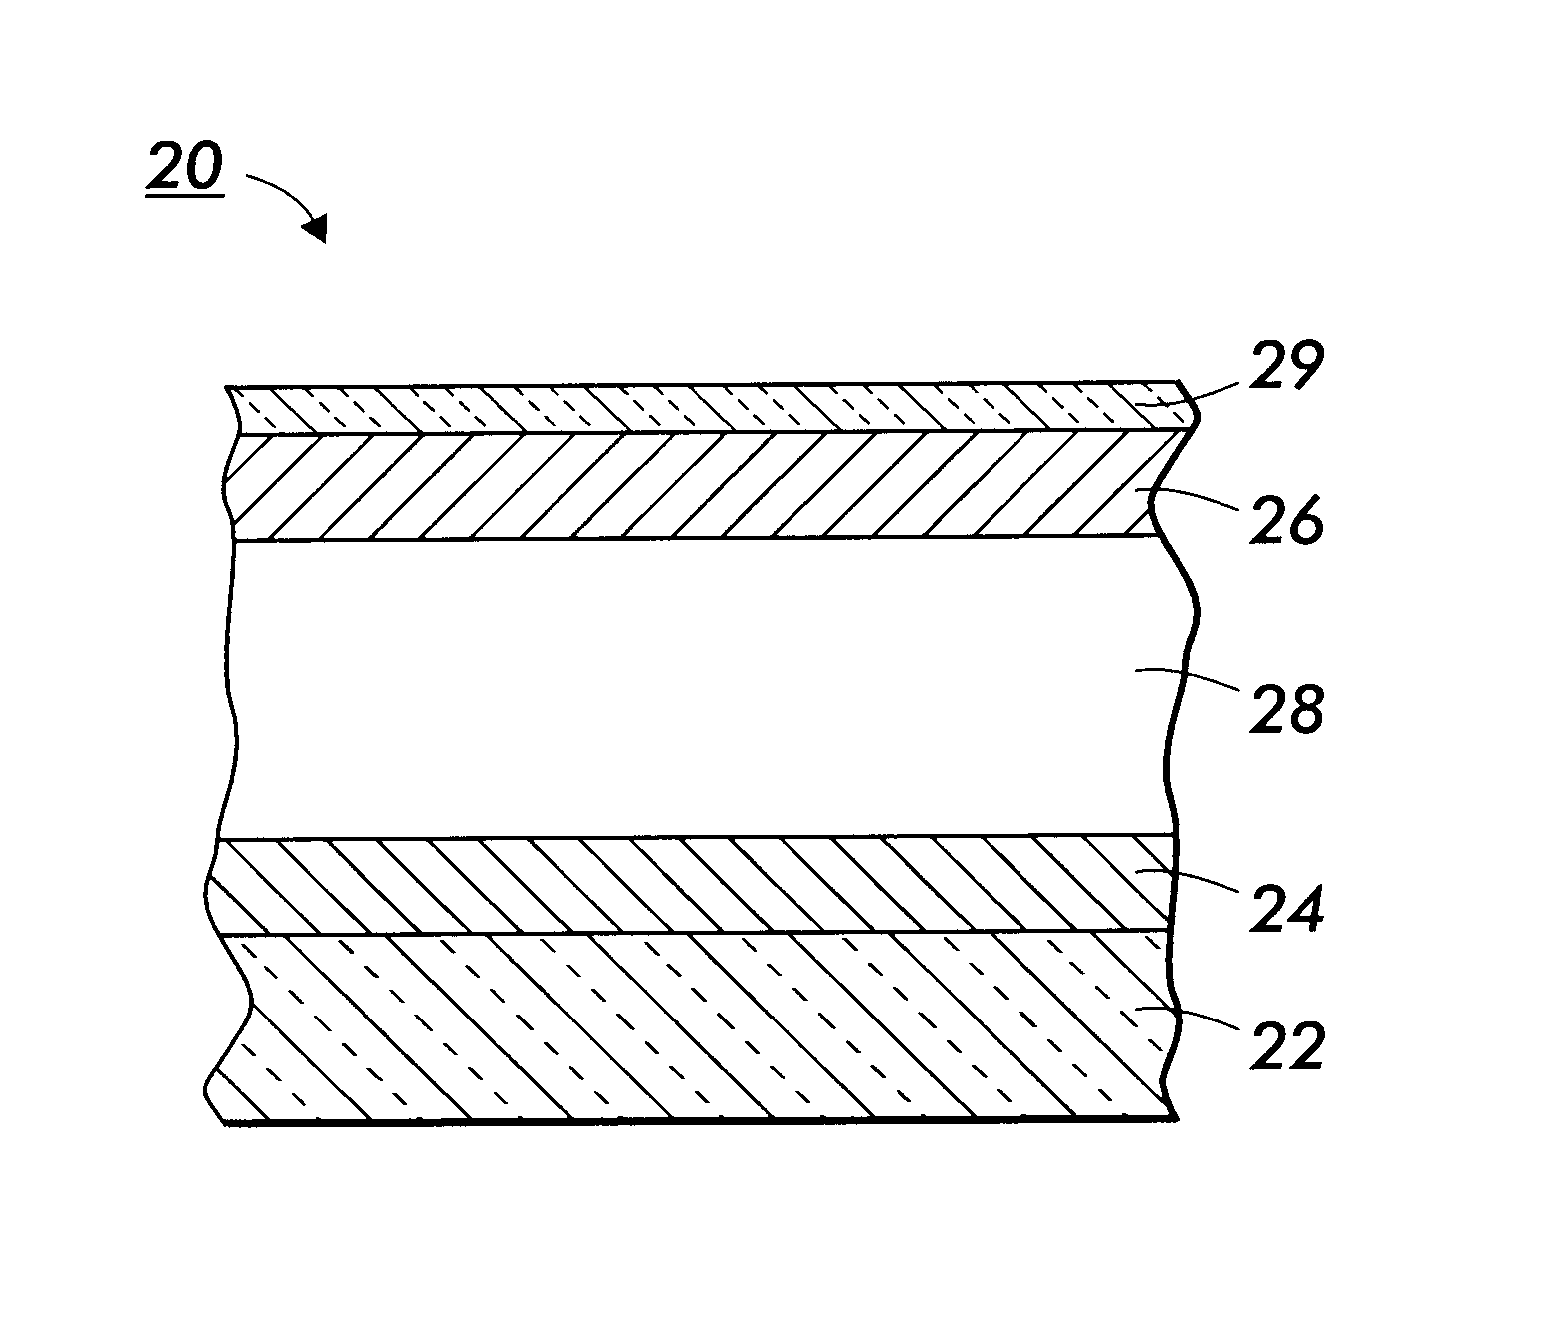 Electroluminescent devices containing thermal protective layers